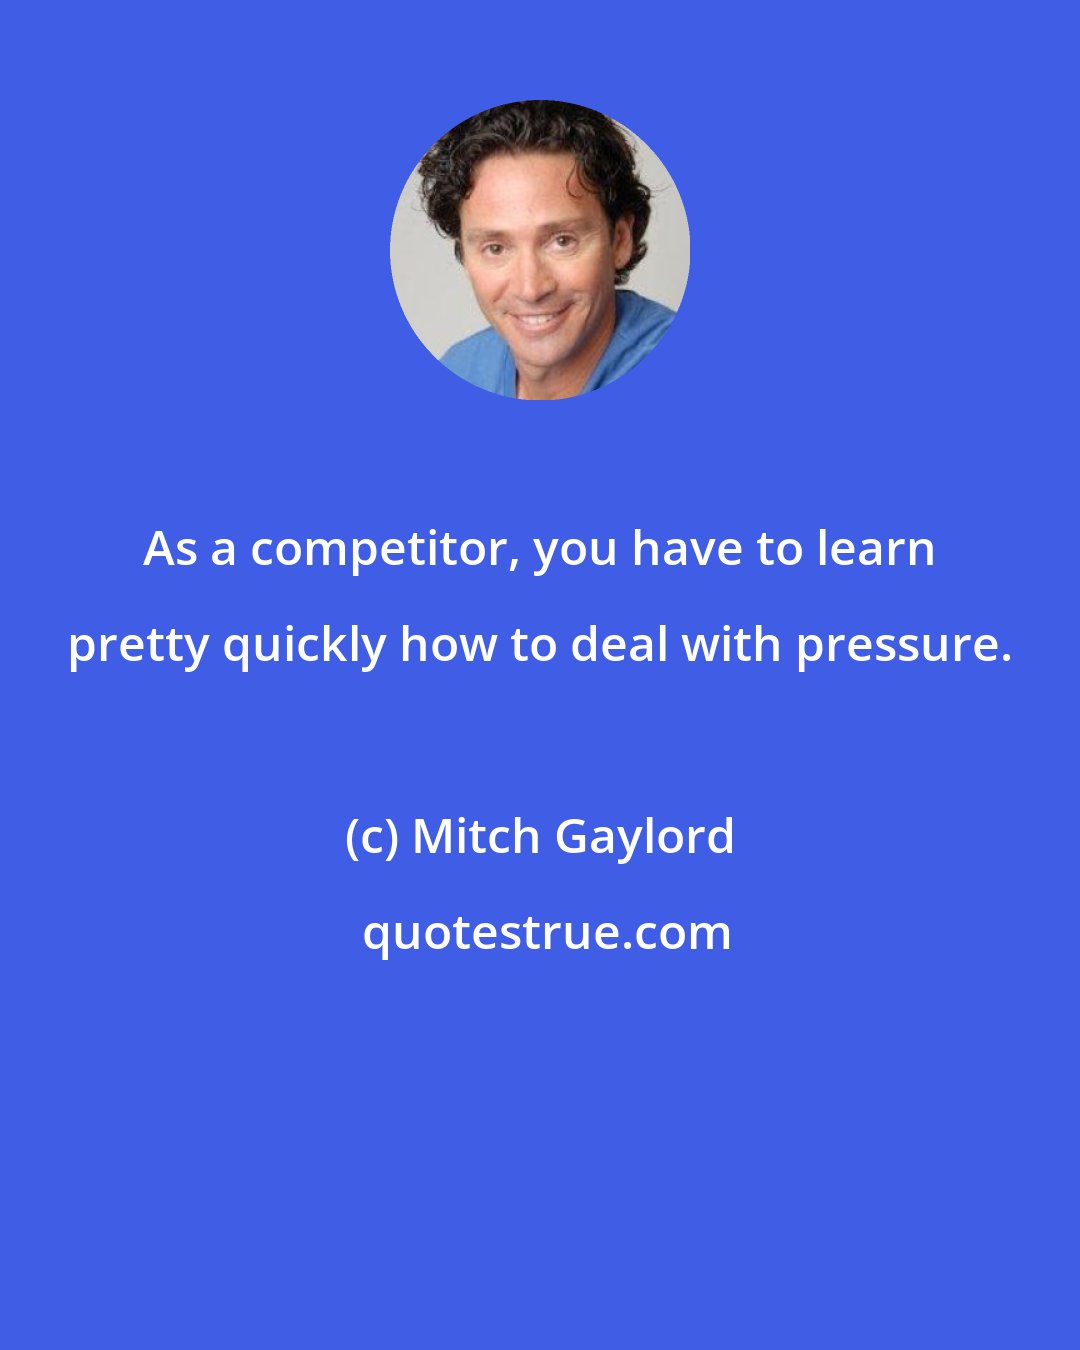 Mitch Gaylord: As a competitor, you have to learn pretty quickly how to deal with pressure.